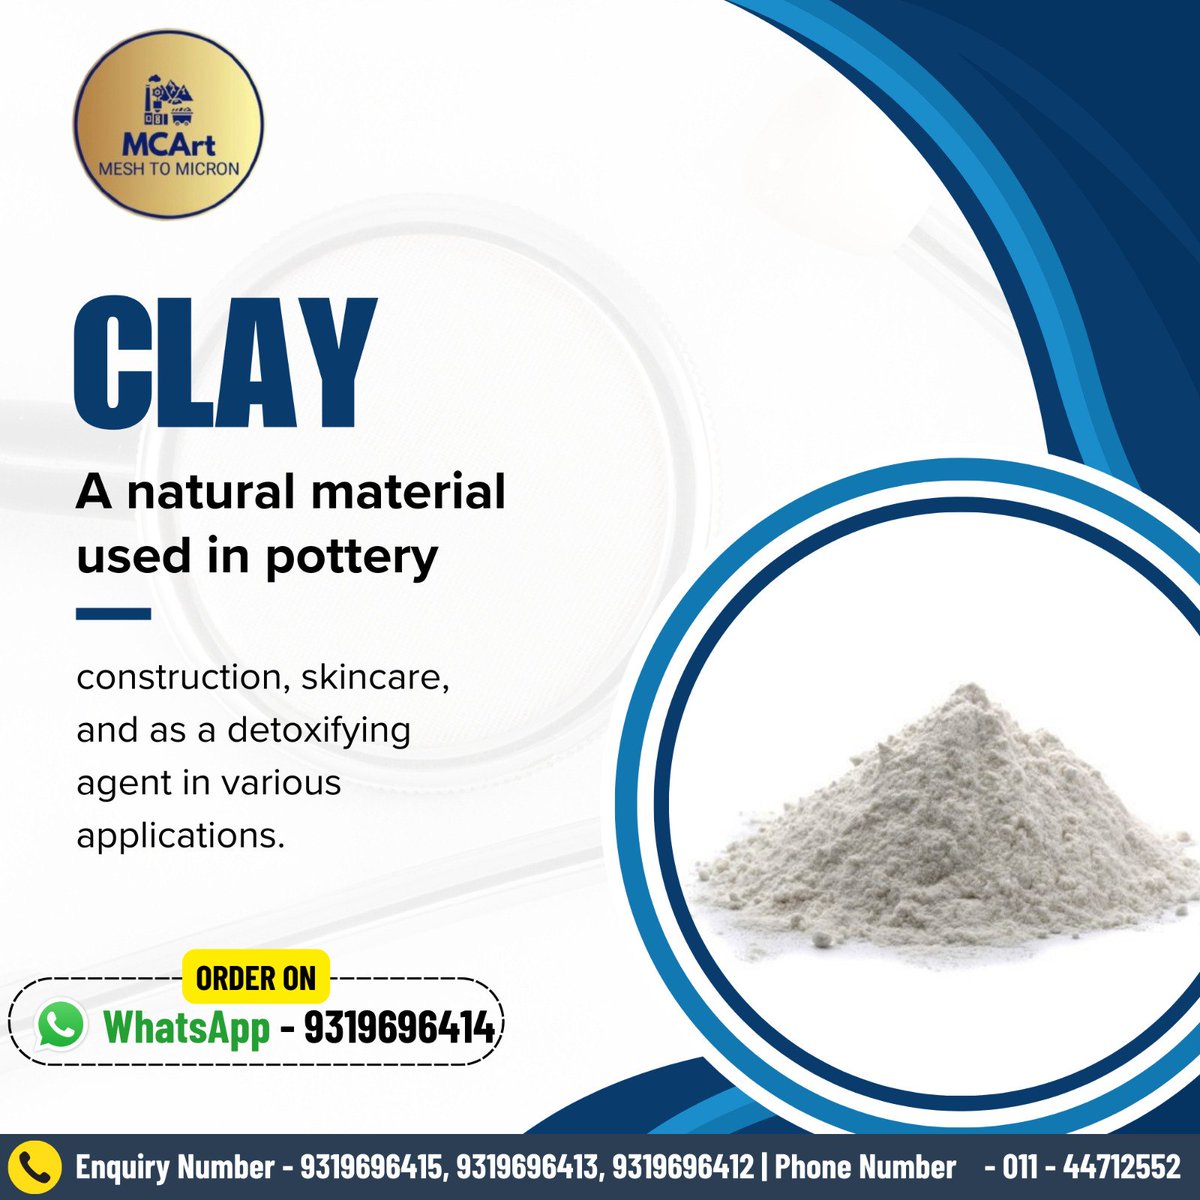 Clay 
For more details
Whatsapp us at 093196 96414
Mcart 

#Mcart #Meshtomicron #Minerals #Chemicals #MineralResources #ChemicalIndustry #MineralExtraction #ChemicalCompounds #MineralProcessing #ChemicalManufacturing #Clay #Pottery #Skincare #NaturalMaterial #ClayBenefits